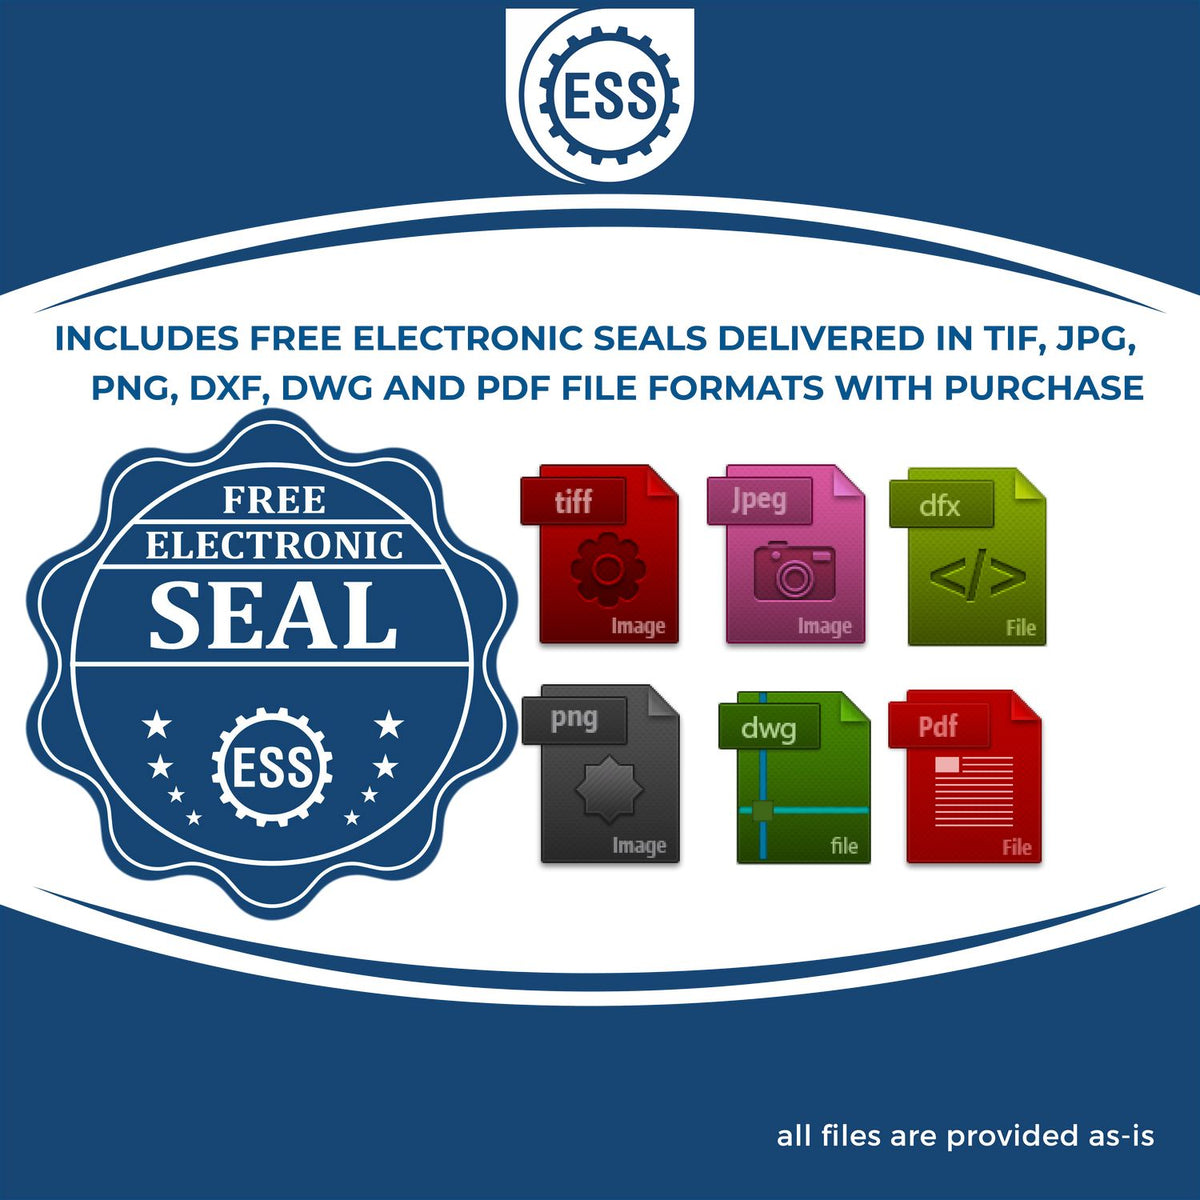 An infographic for the free electronic seal for the Premium MaxLight Pre-Inked New York Landscape Architectural Stamp illustrating the different file type icons such as DXF, DWG, TIF, JPG and PNG.